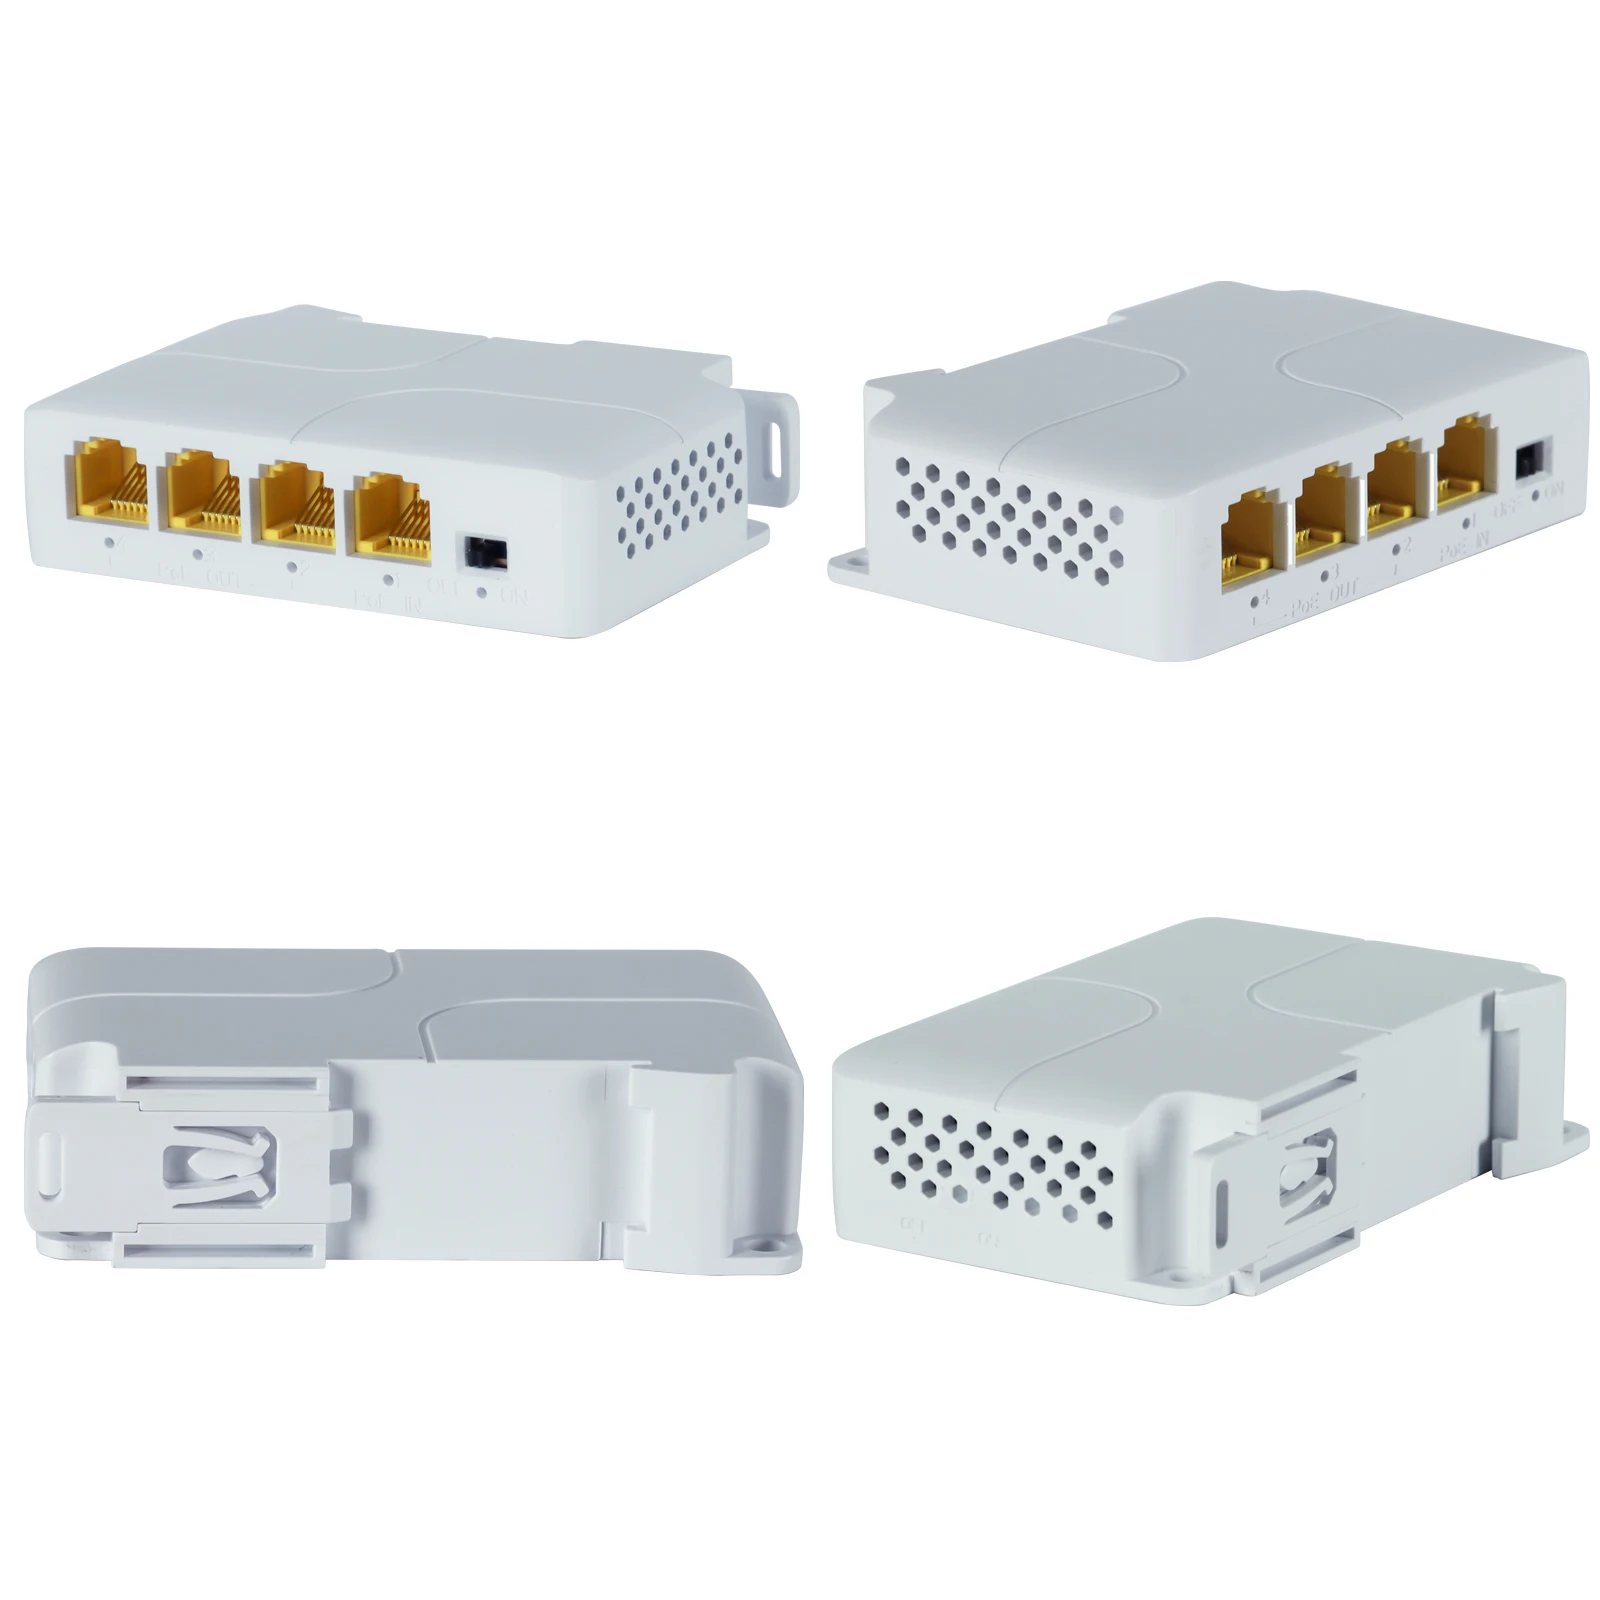 50pcs/lot 4 Port Gigabit POE Extender 1000Mbps 1 to 3 Network Switch Repeater with IEEE802.3af for PoE Switch NVR IP Camera AP